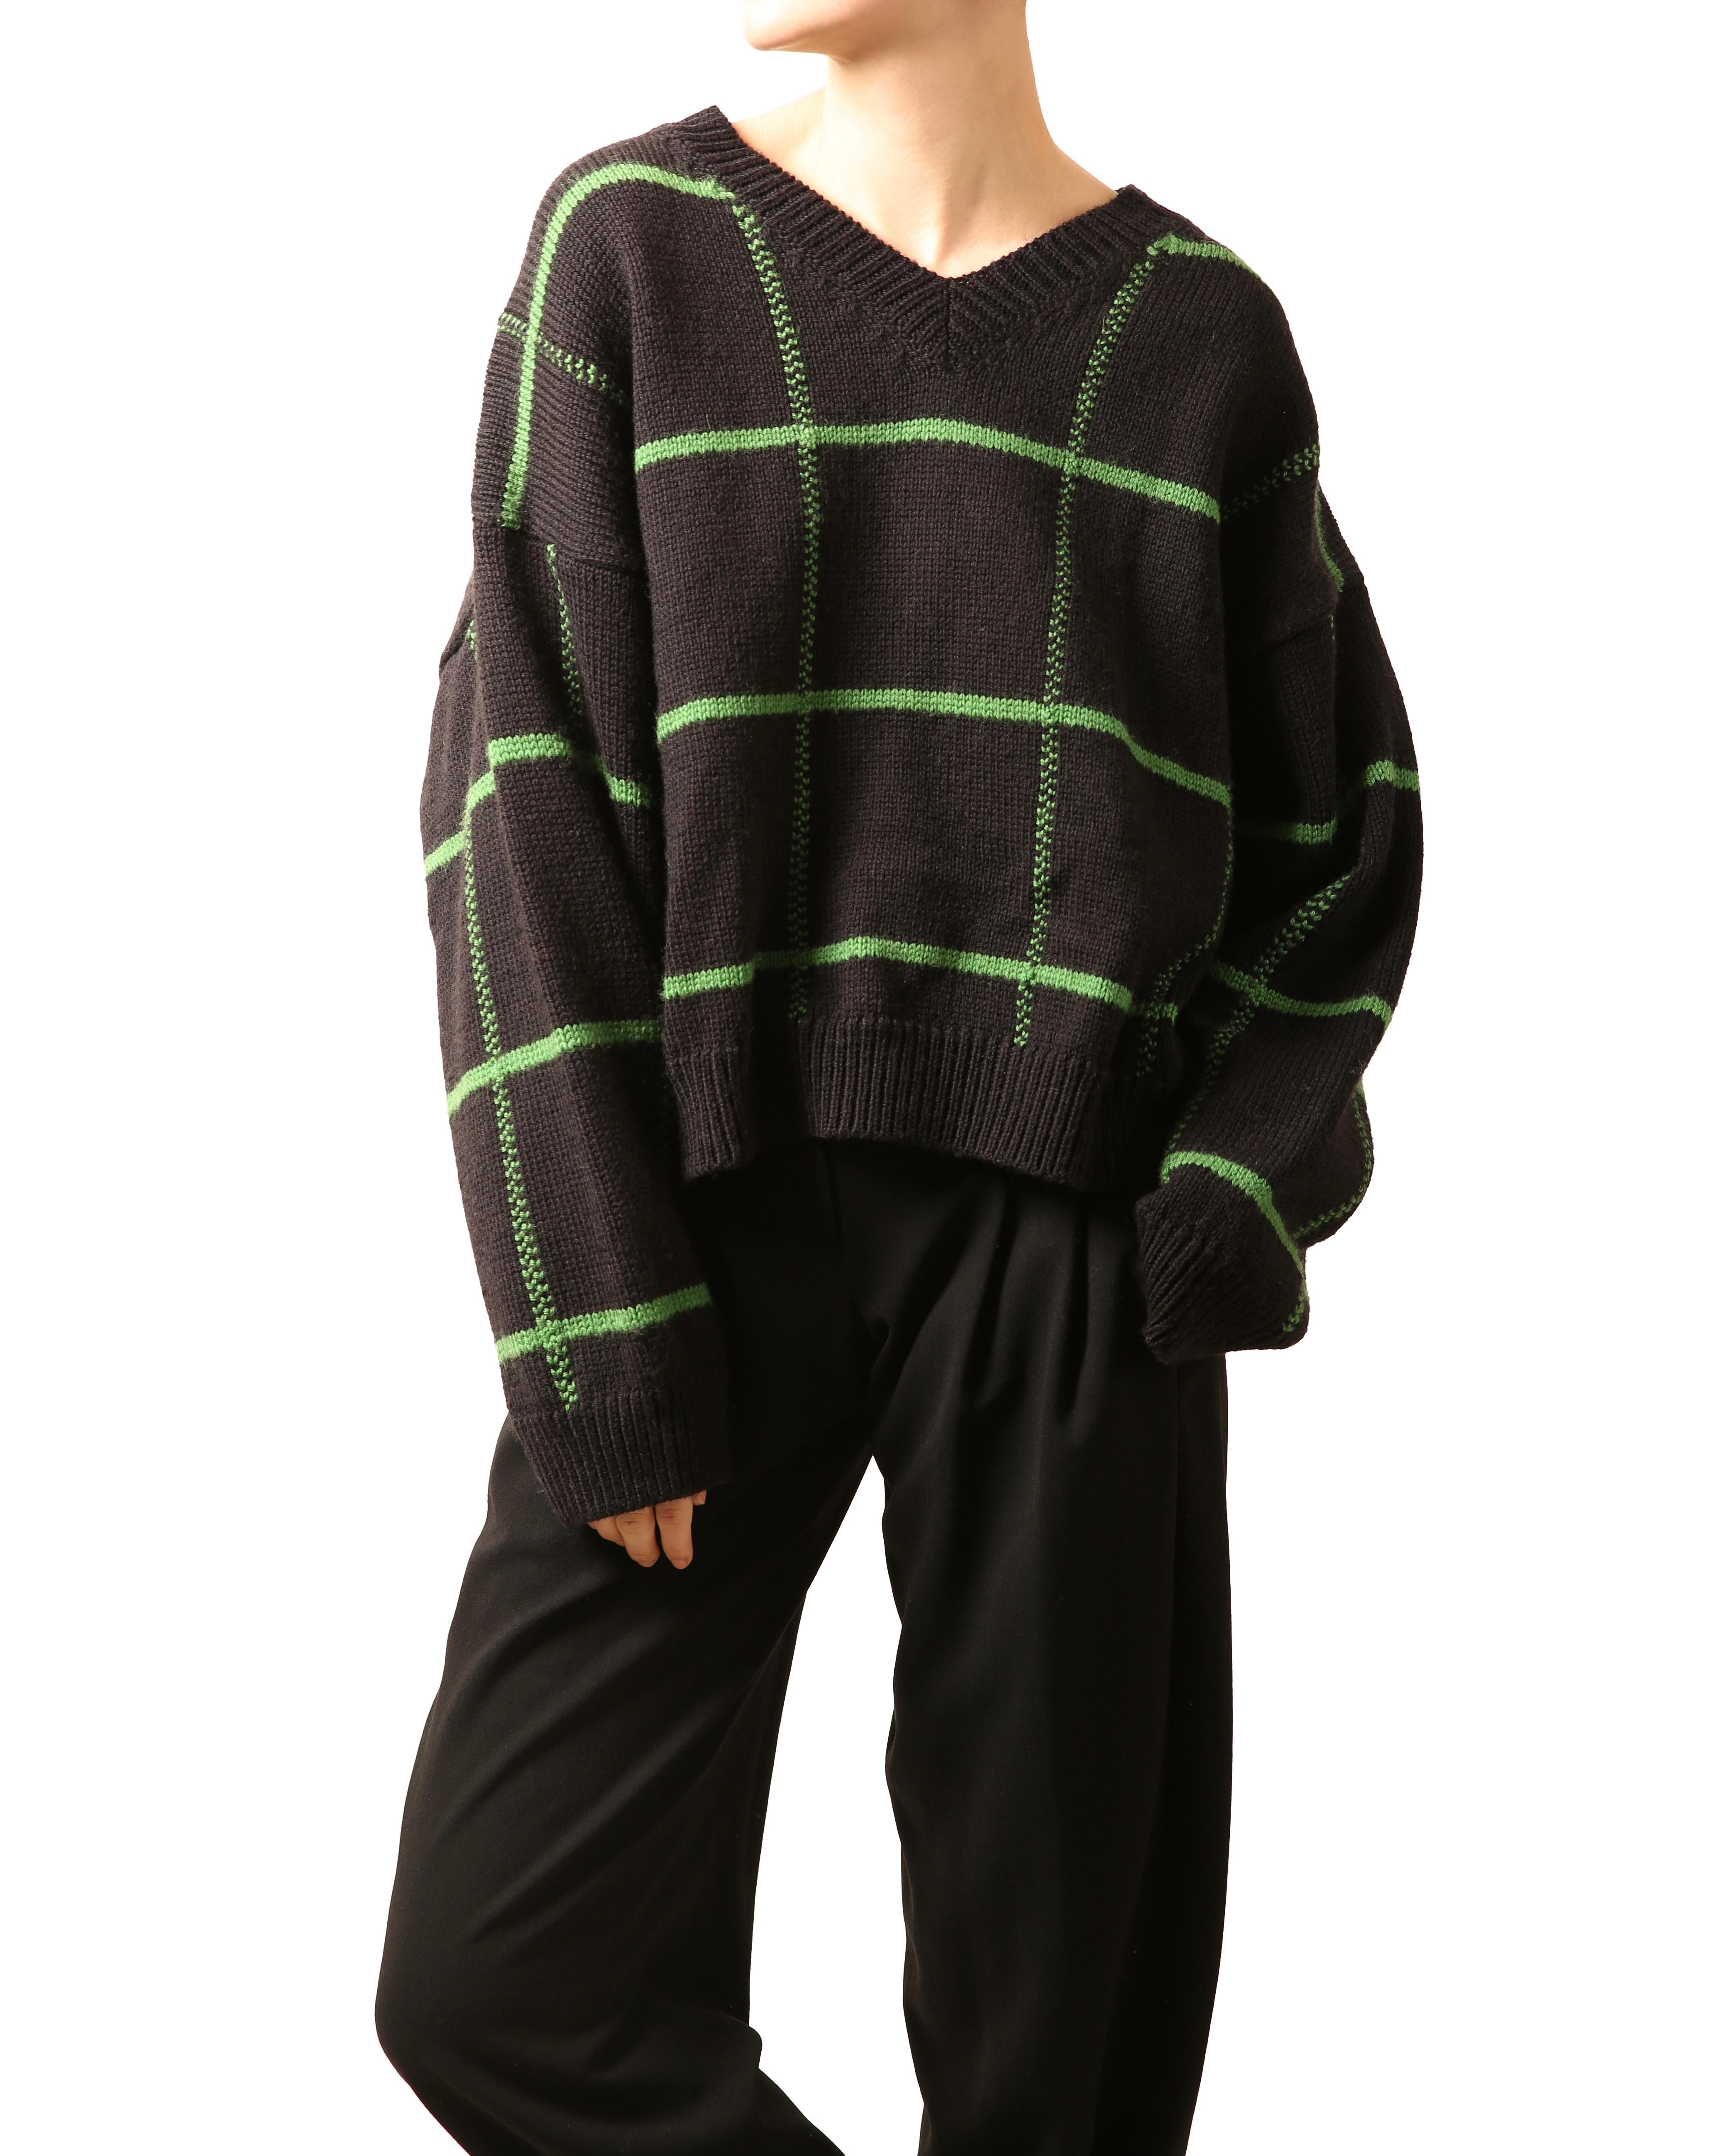 LOVE LALI VINTAGE

Dries Van Noten oversized knit slouch sweater
Black with green windowpane check style print
V neck
Ribbed neckline, cuffs and hem

Composition:
100% wool

Size:
Large - but will also work for a XS-S-M depending on the desired fit